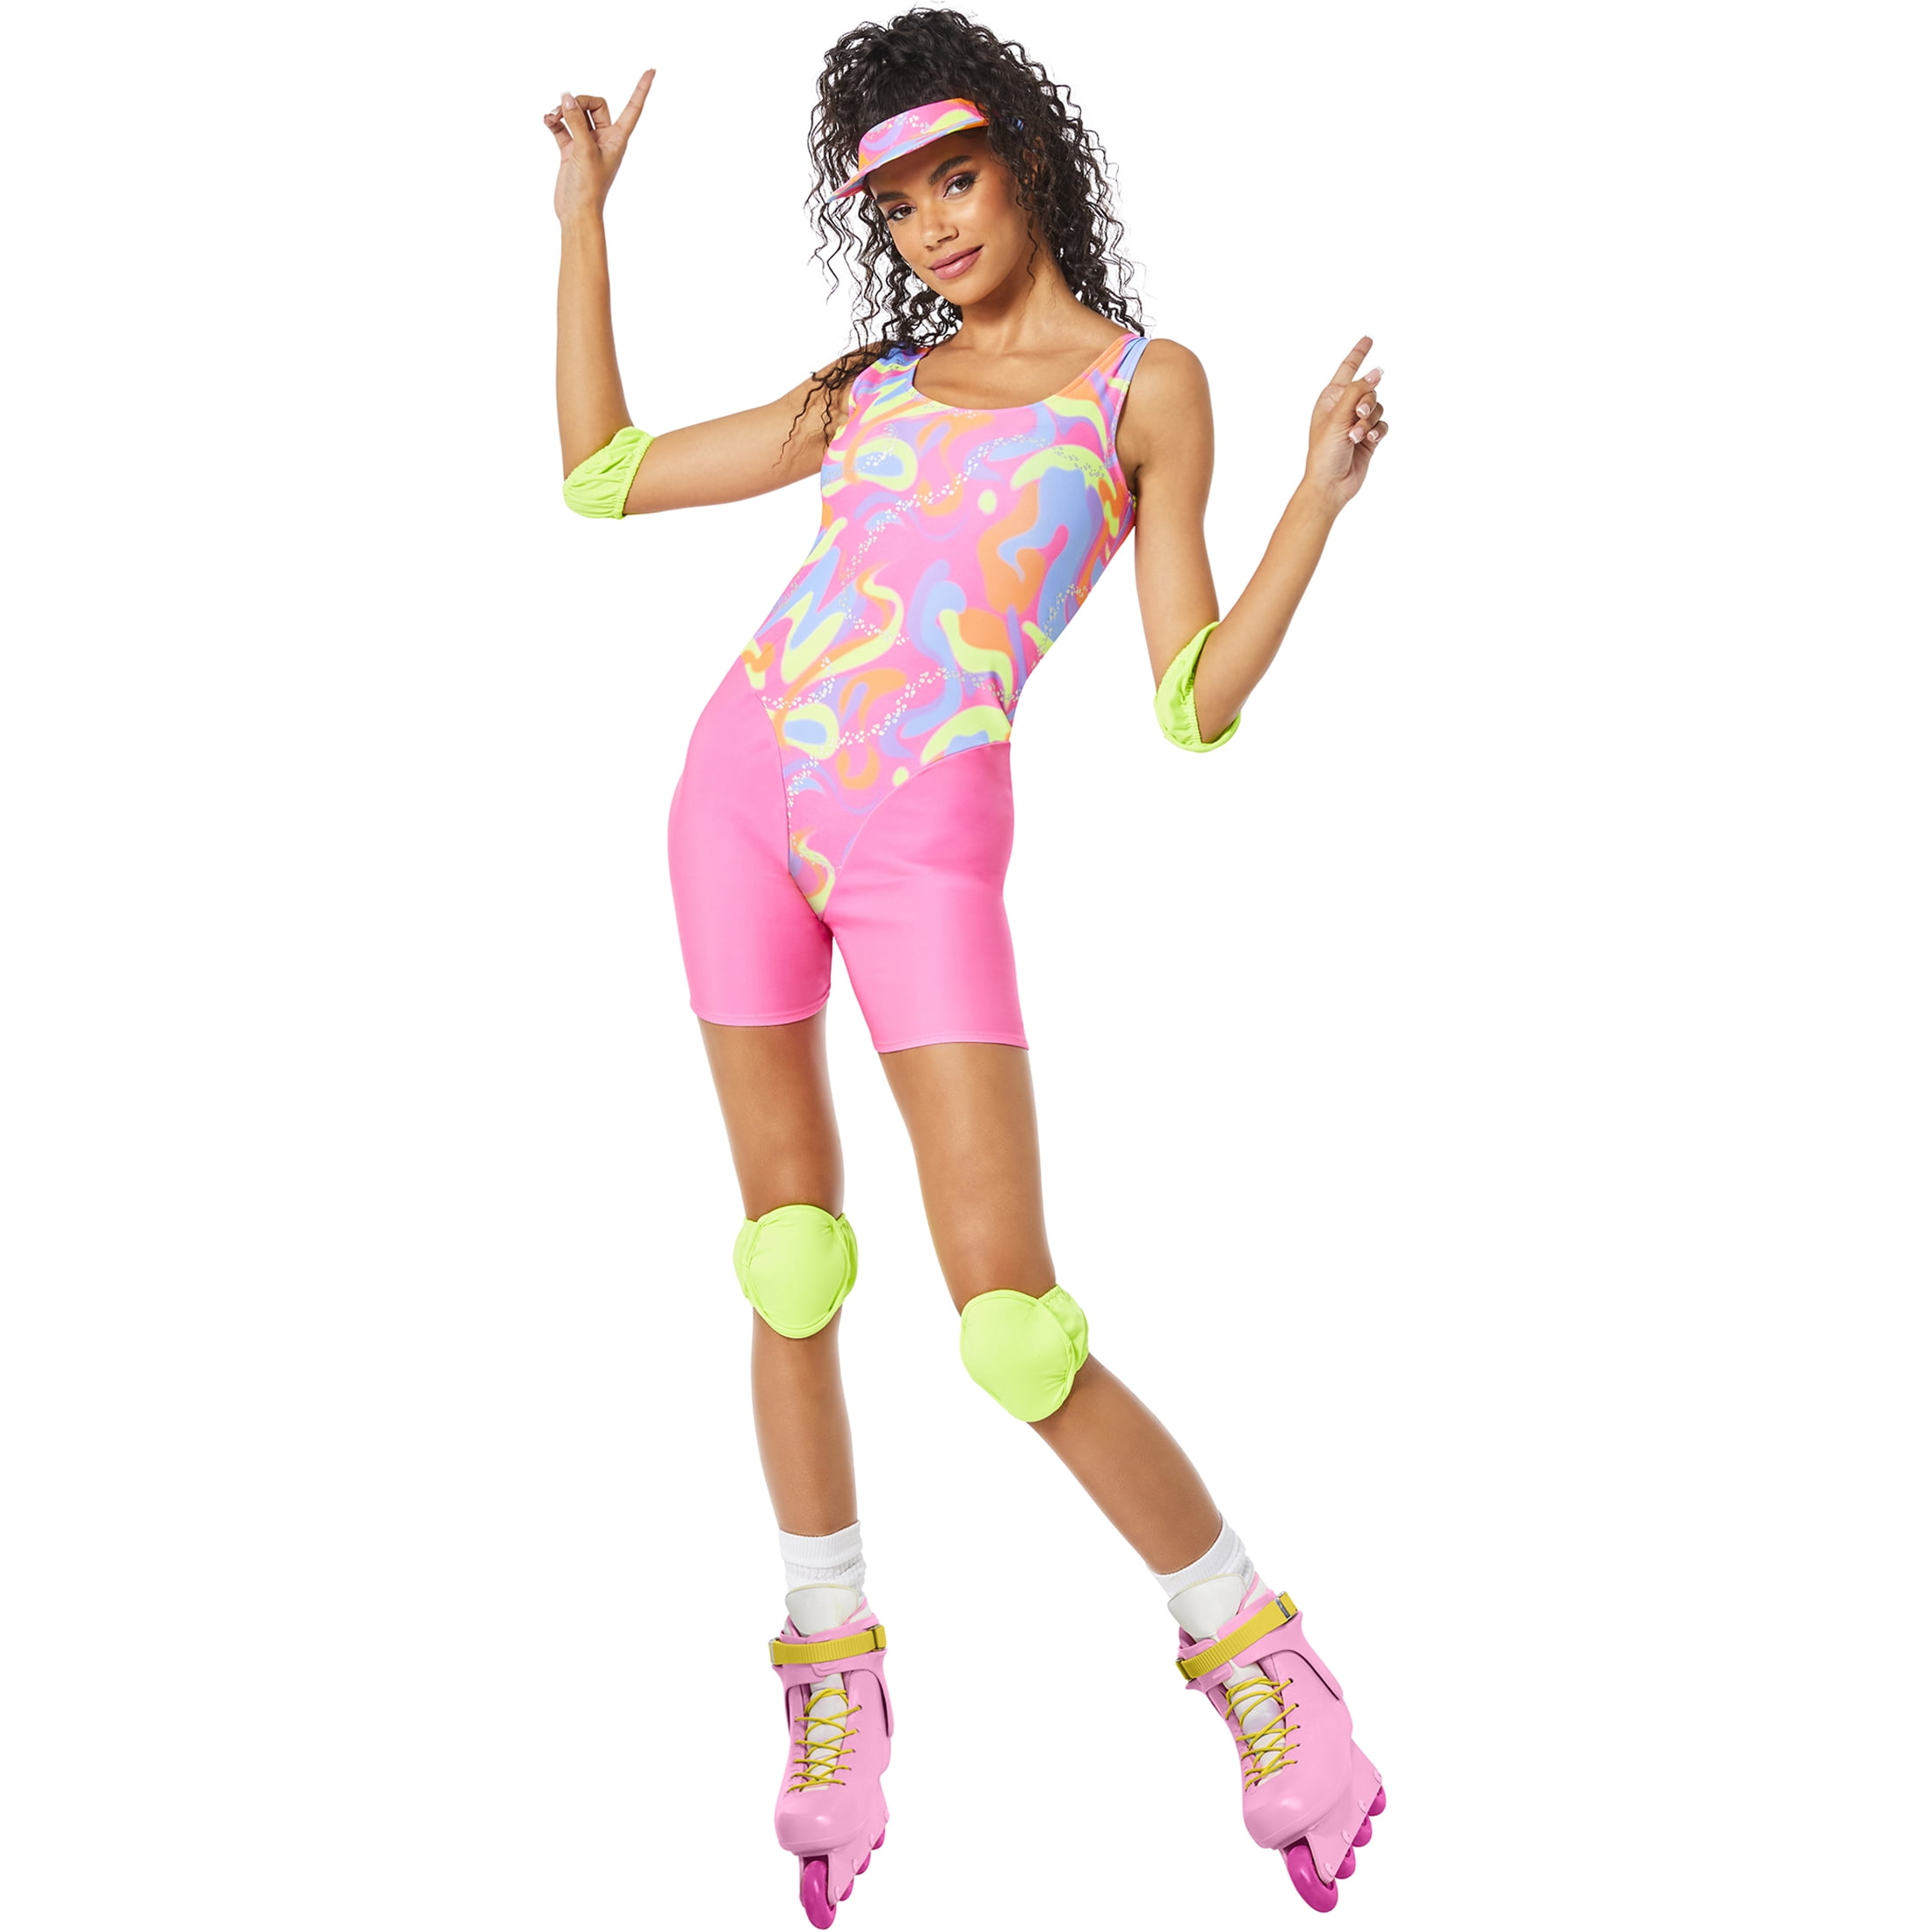 Halloween Women's Rollerblade Barbie Costume, by Way to Celebrate, Size L